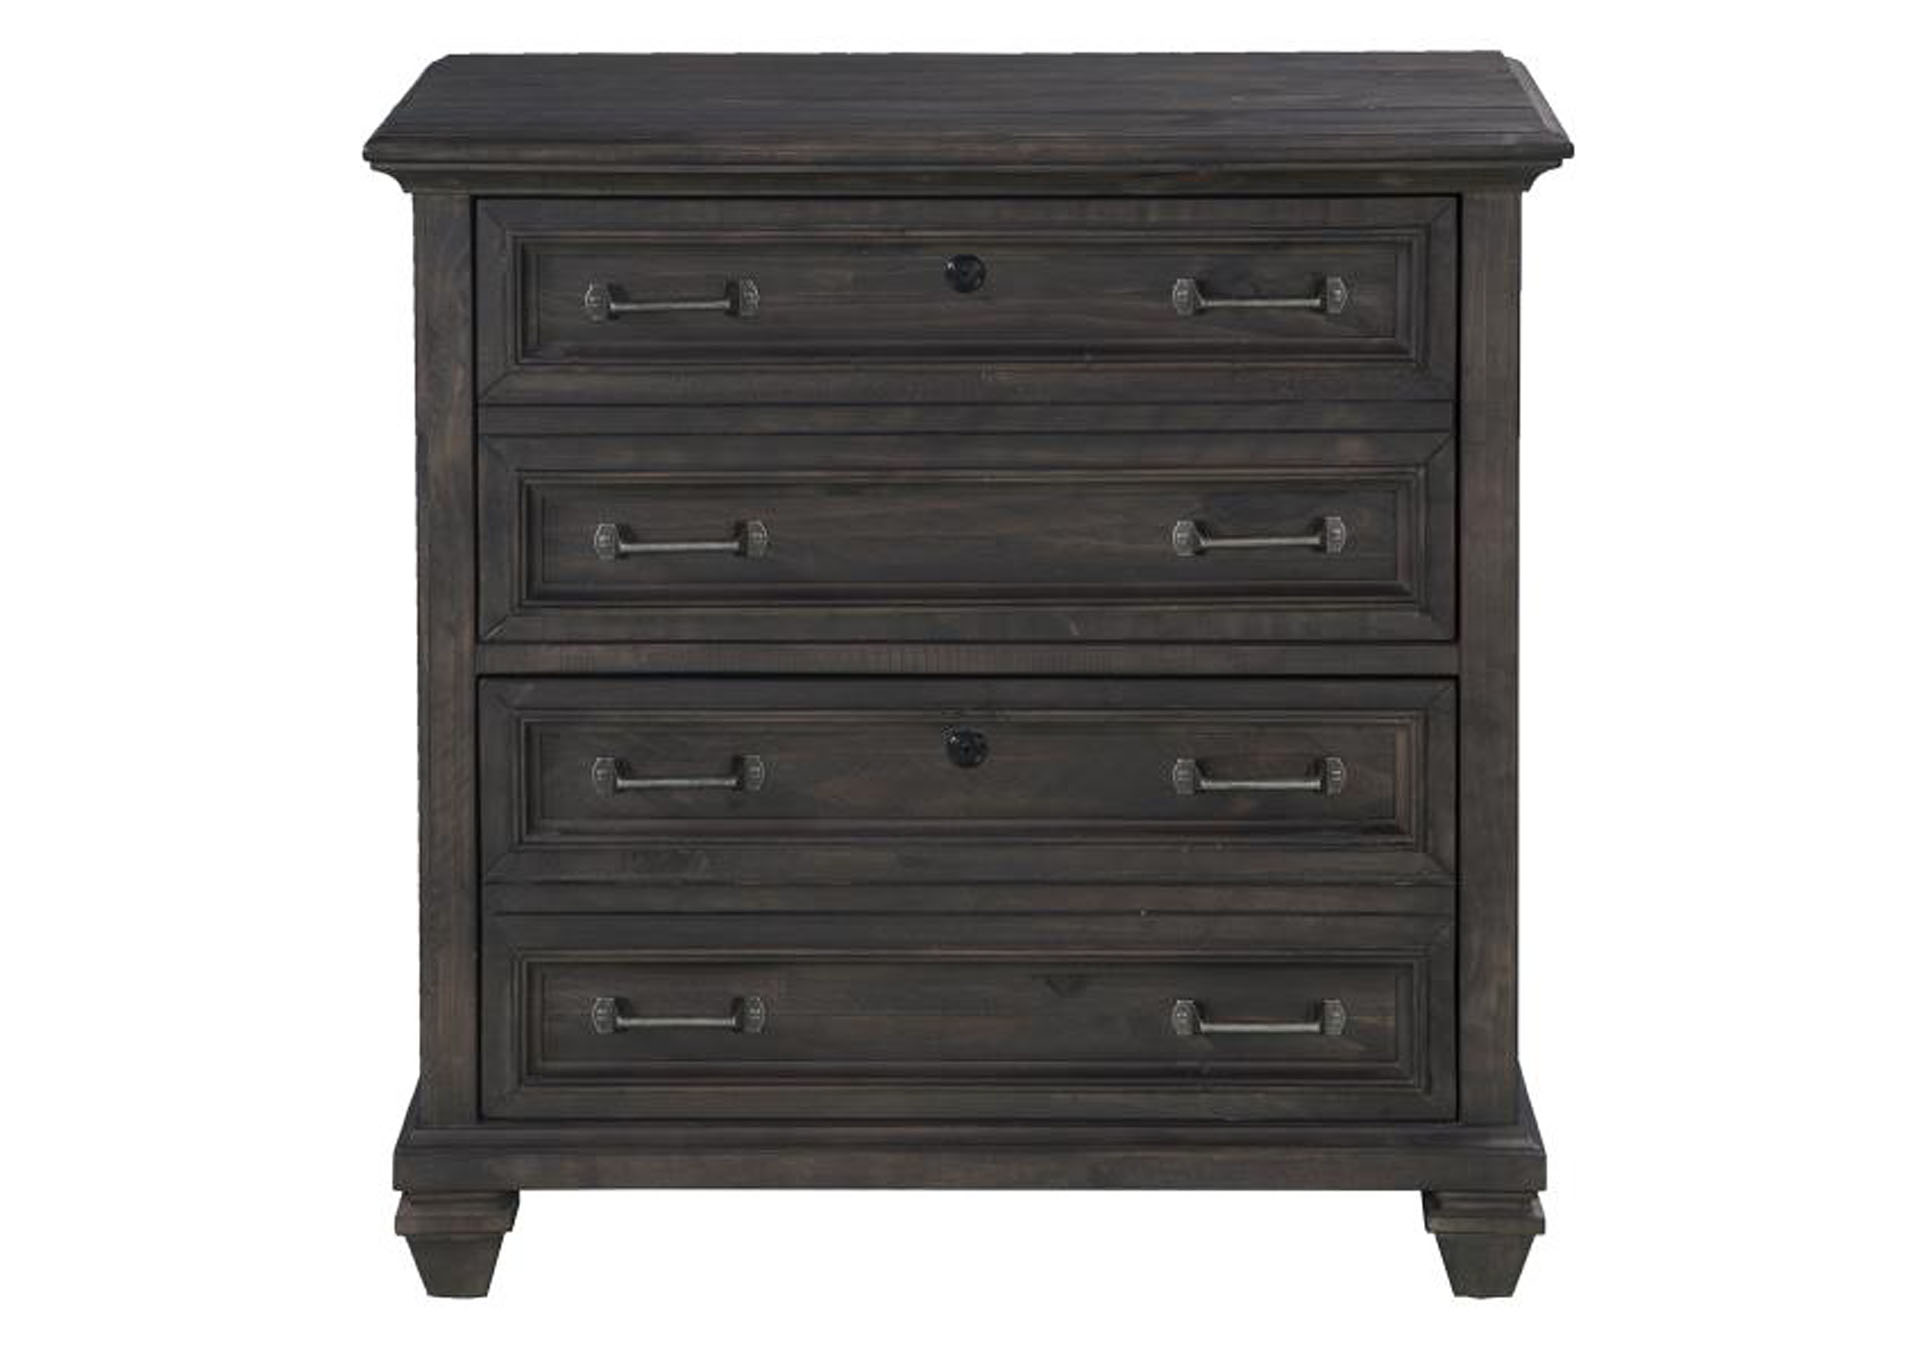 Sutton Place Weathered Charcoal Lateral File,Magnussen